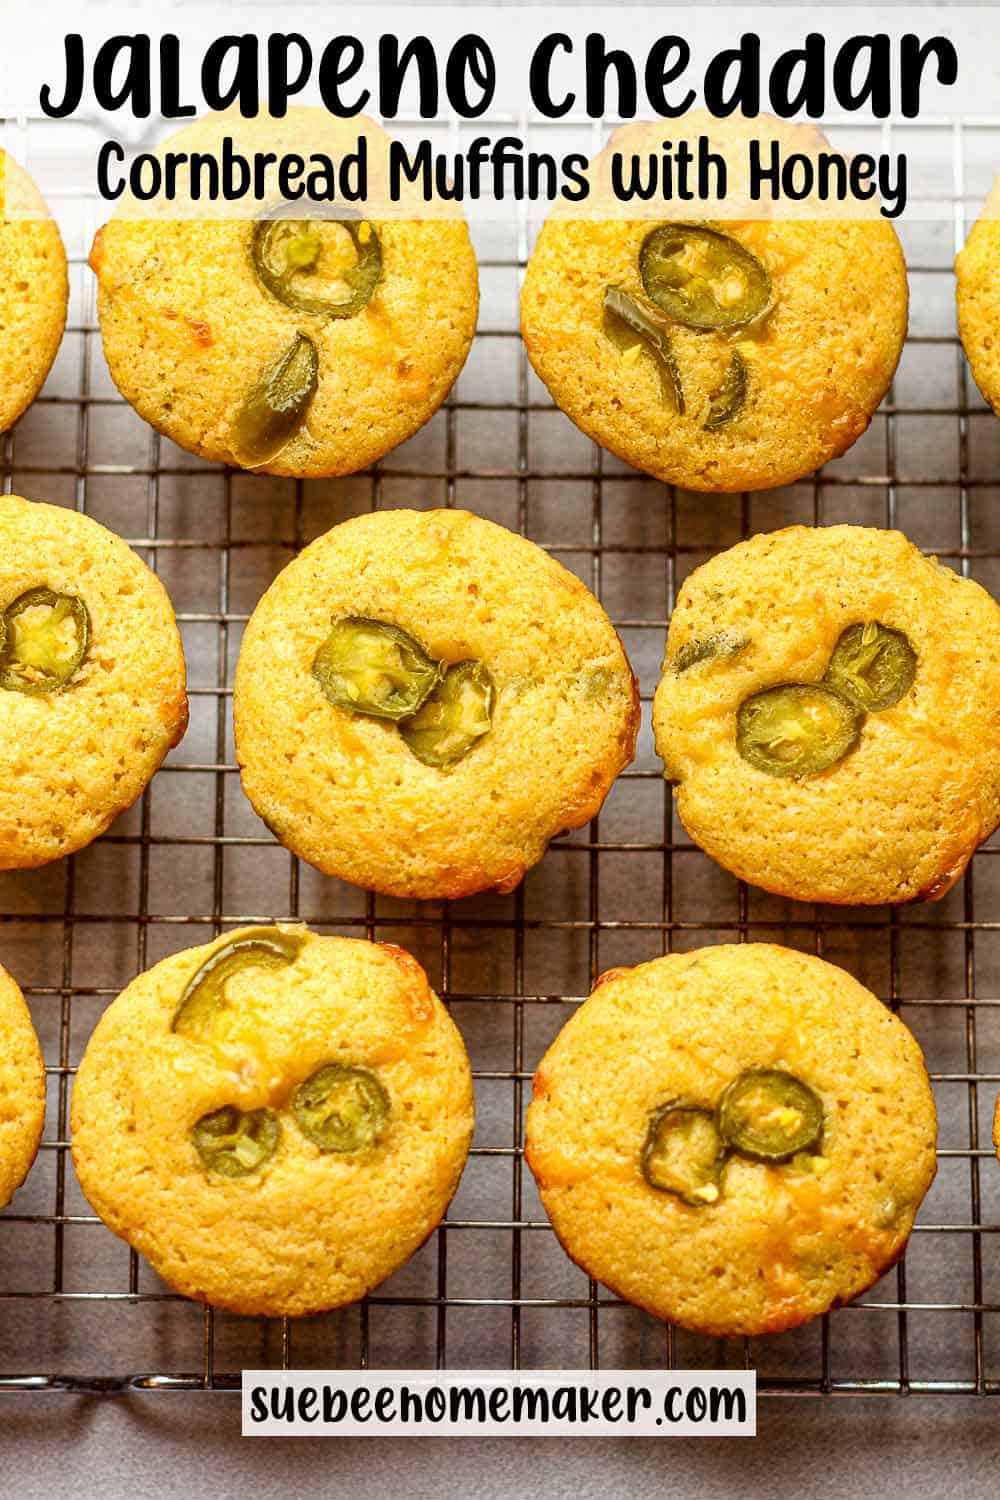 A wire rack of jalapeno cheddar cornbread muffins with honey.